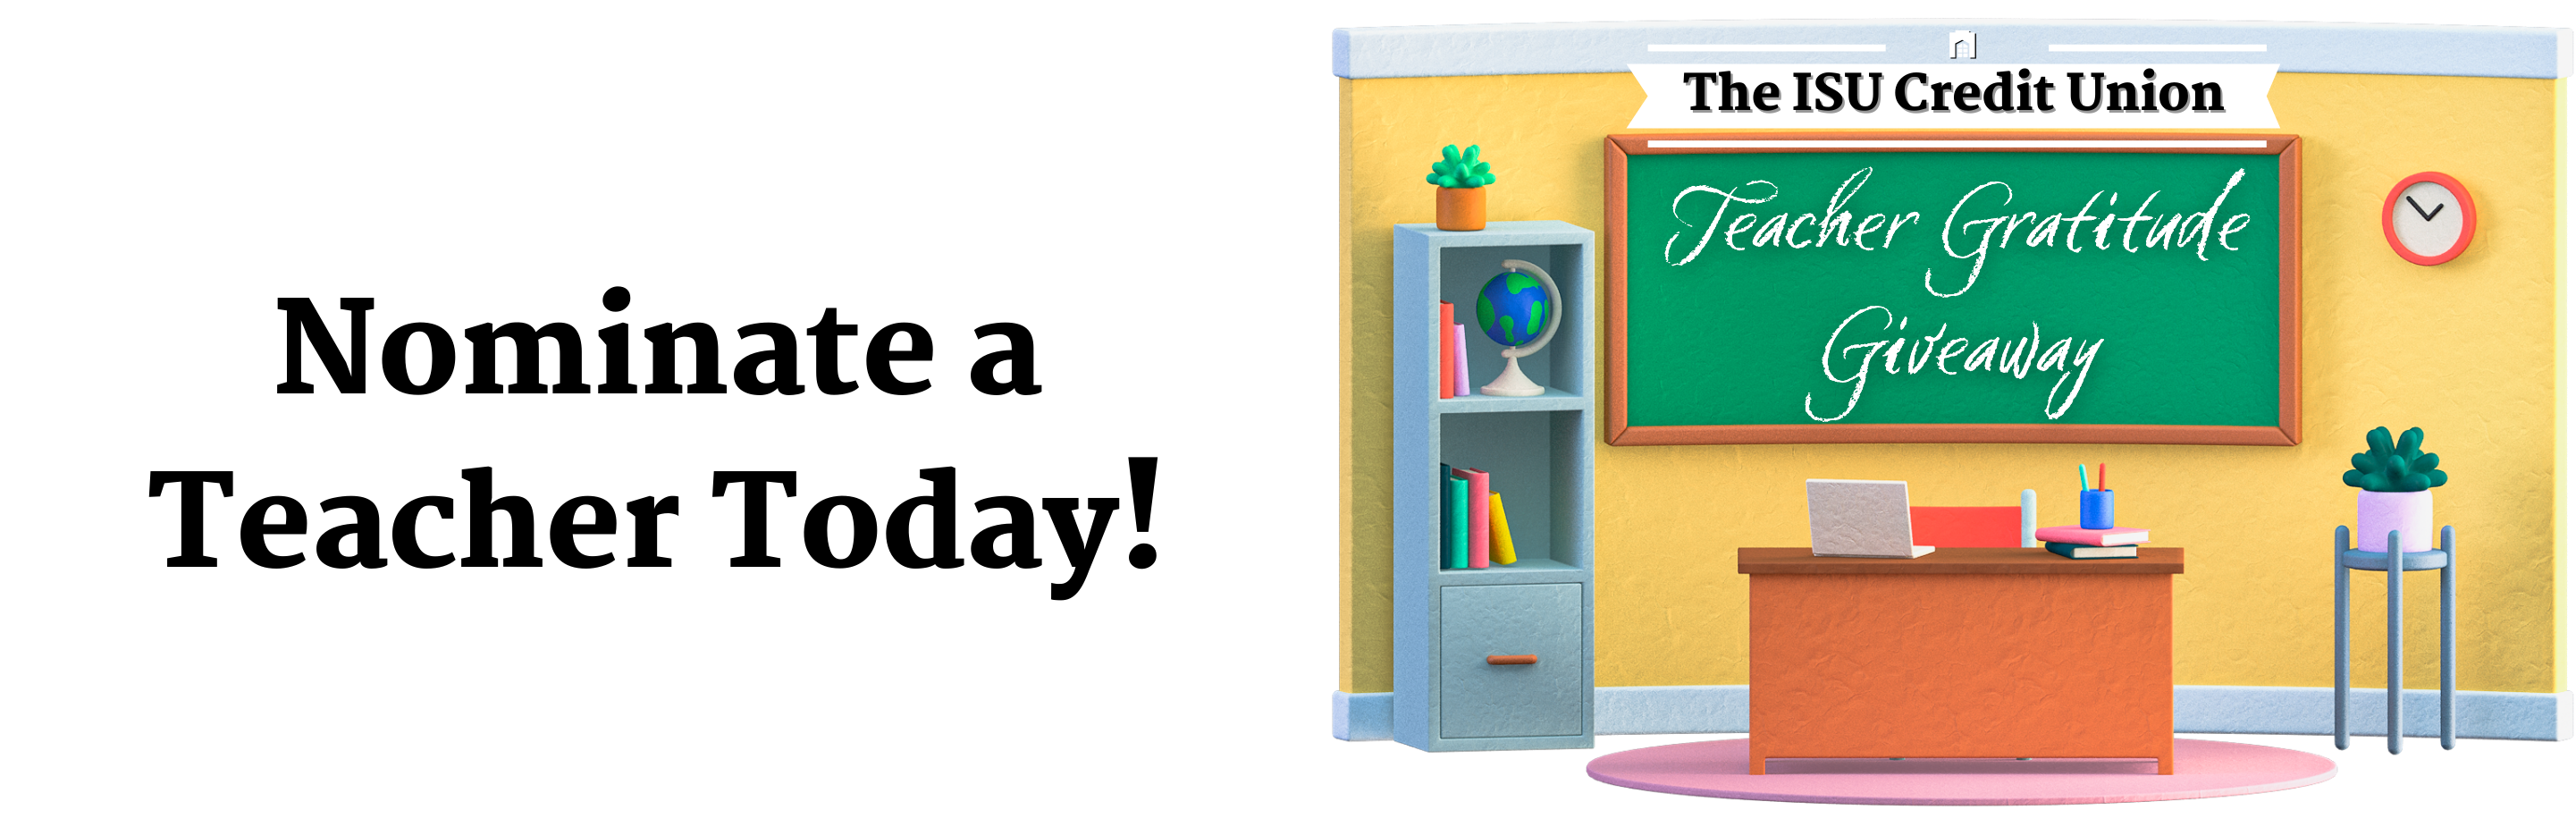 Great Teacher Giveaway Page Header 2882 &#215; 925